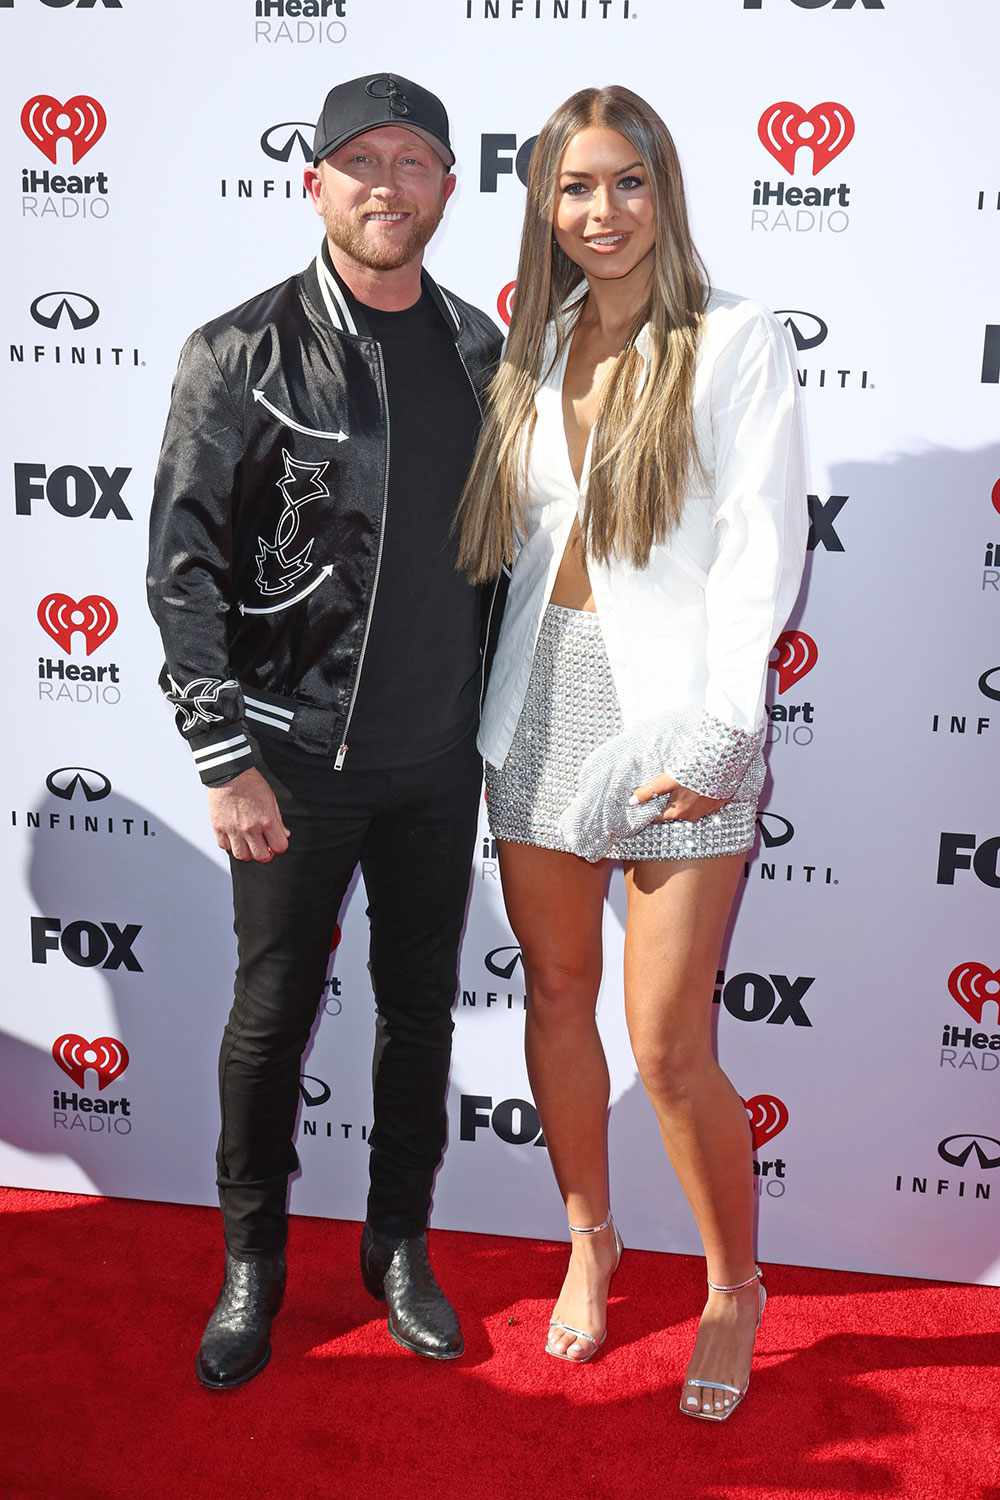 LOS ANGELES, CALIFORNIA - MARCH 27: (FOR EDITORIAL USE ONLY) (L-R) Cole Swindell and Courtney Little attend the 2023 iHeartRadio Music Awards at Dolby Theatre in Los Angeles, California on March 27, 2023. Broadcasted live on FOX. (Photo by Joe Scarnici/Getty Images for iHeartRadio)